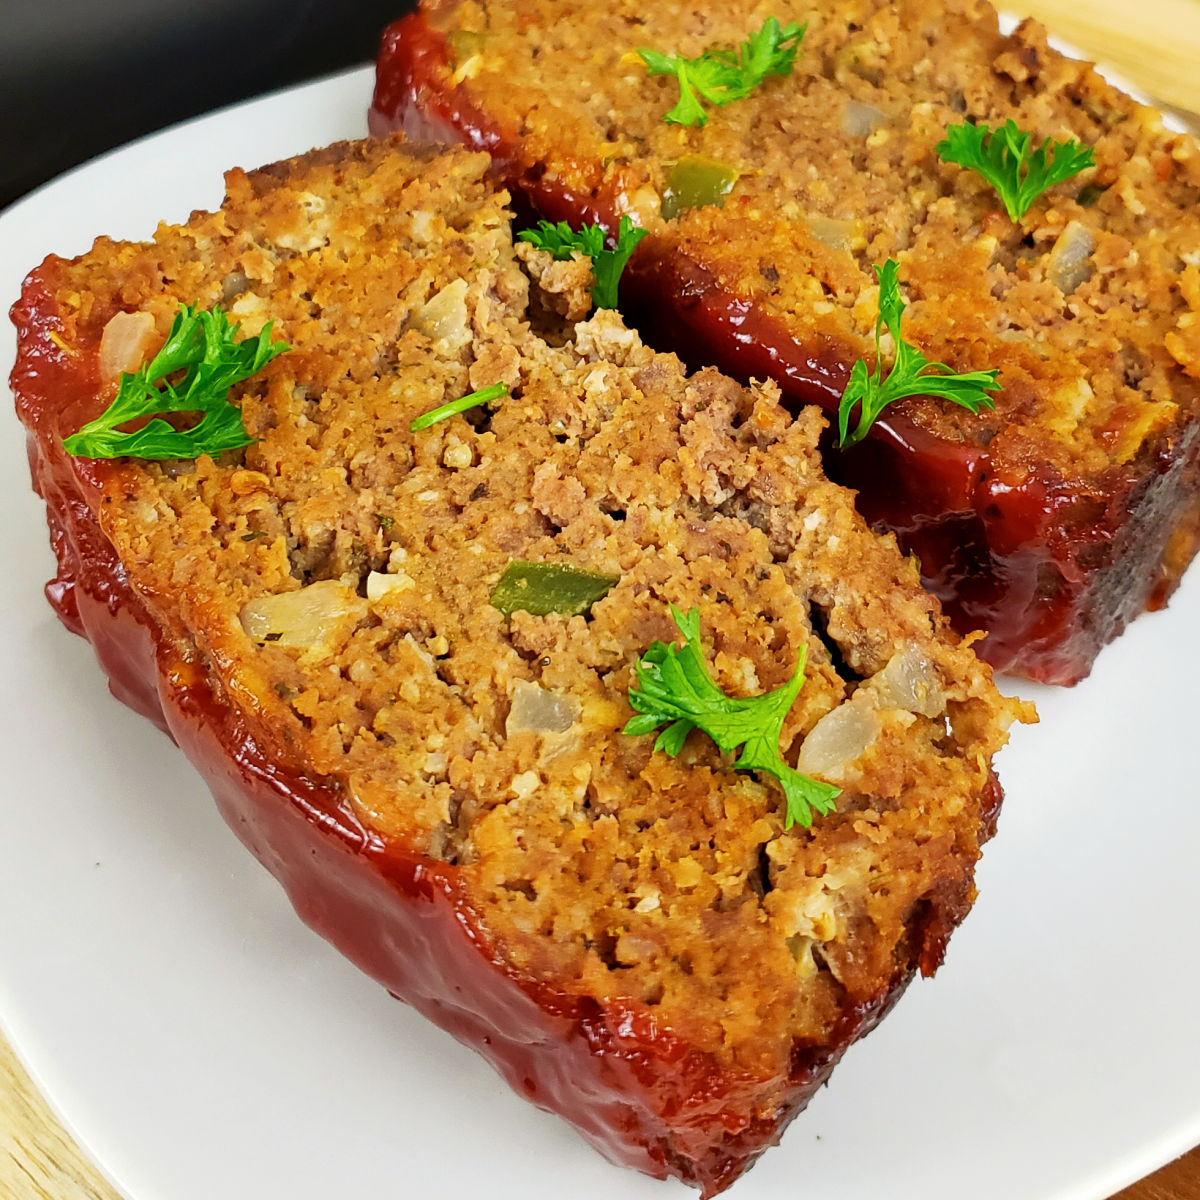 Close up of two slices of gluten free meatloaf topped with chopped parsley on a white plate.